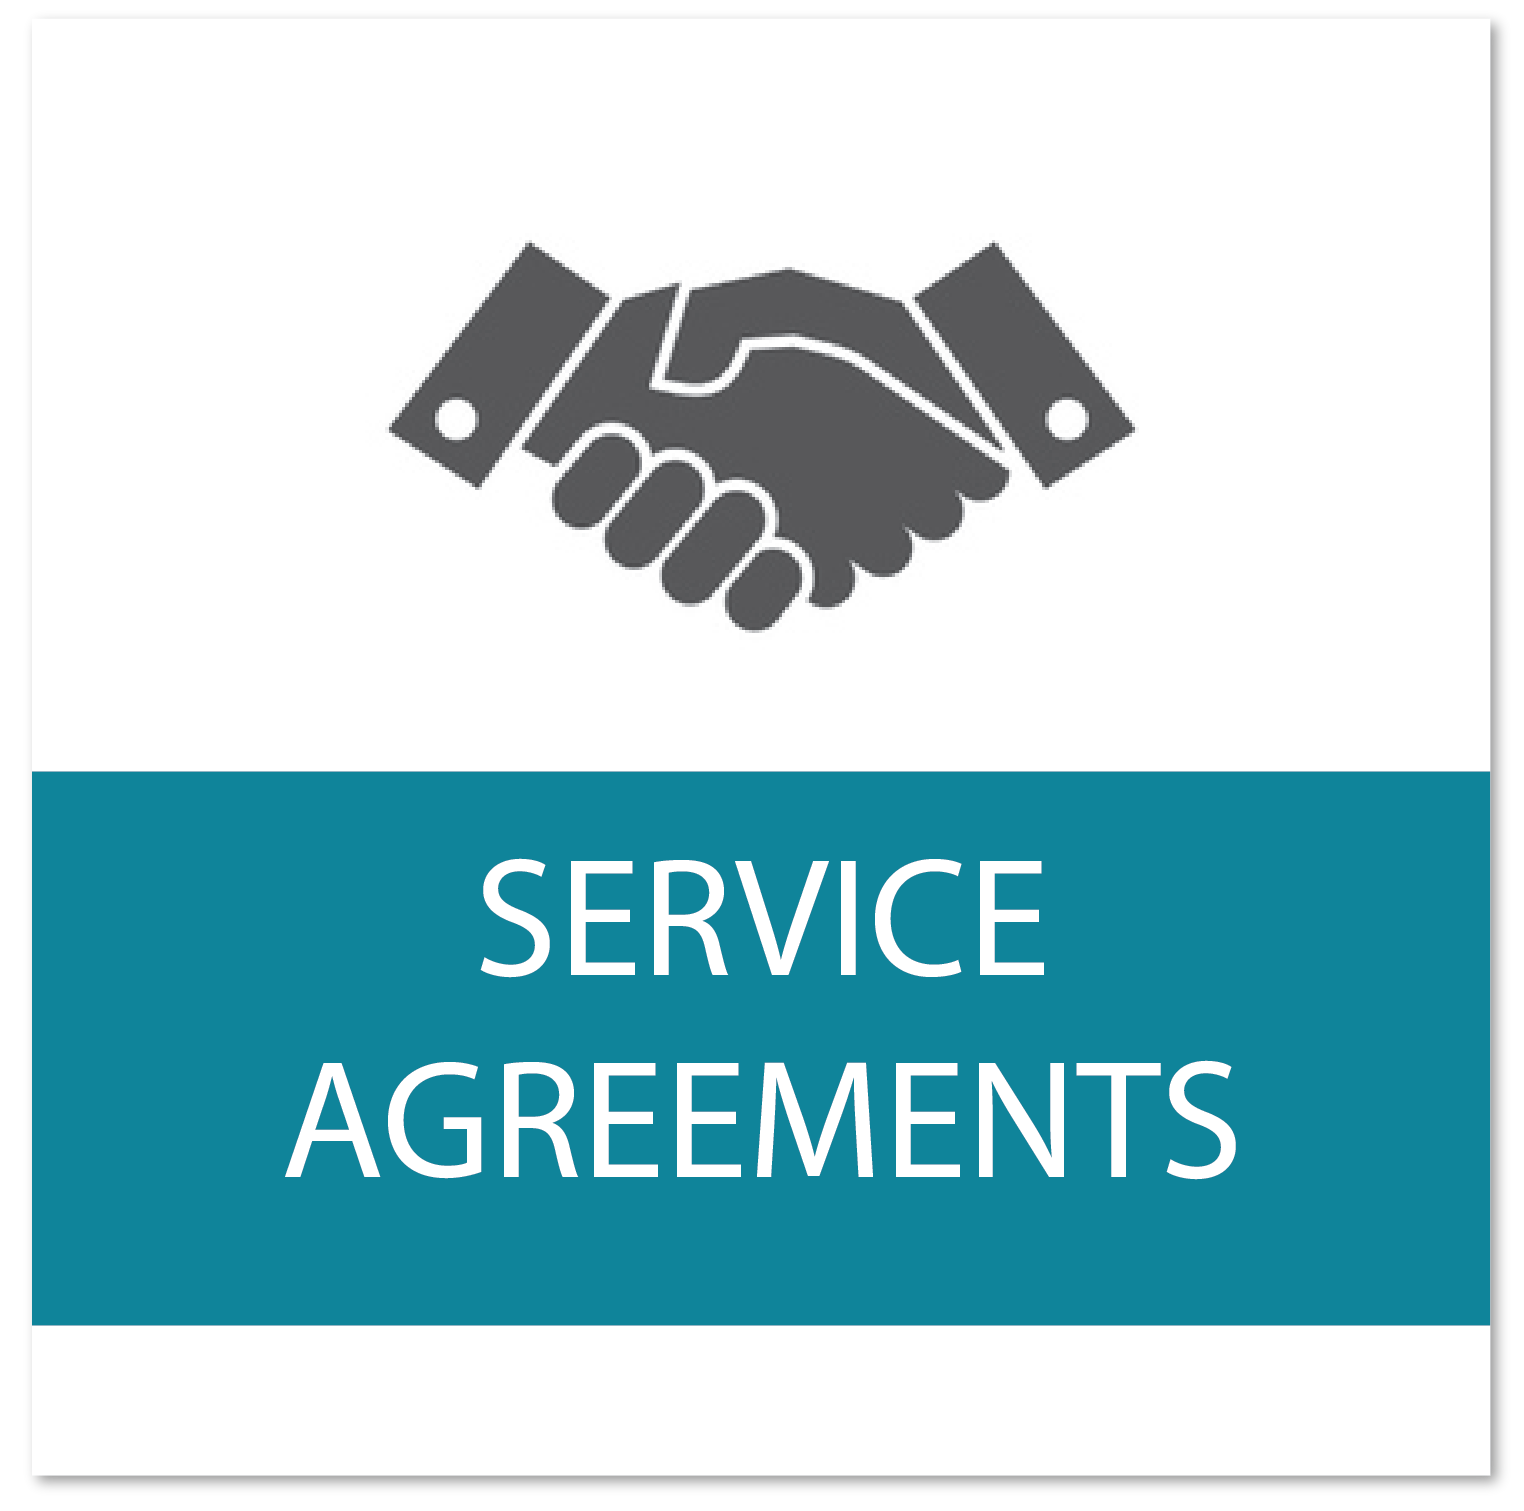 The New Flat Rate also provides scripts to help your team sell service agreements! By simply following our easy process your customers will buy new service agreements with virtually no “selling” required and usually in less than 10 seconds.